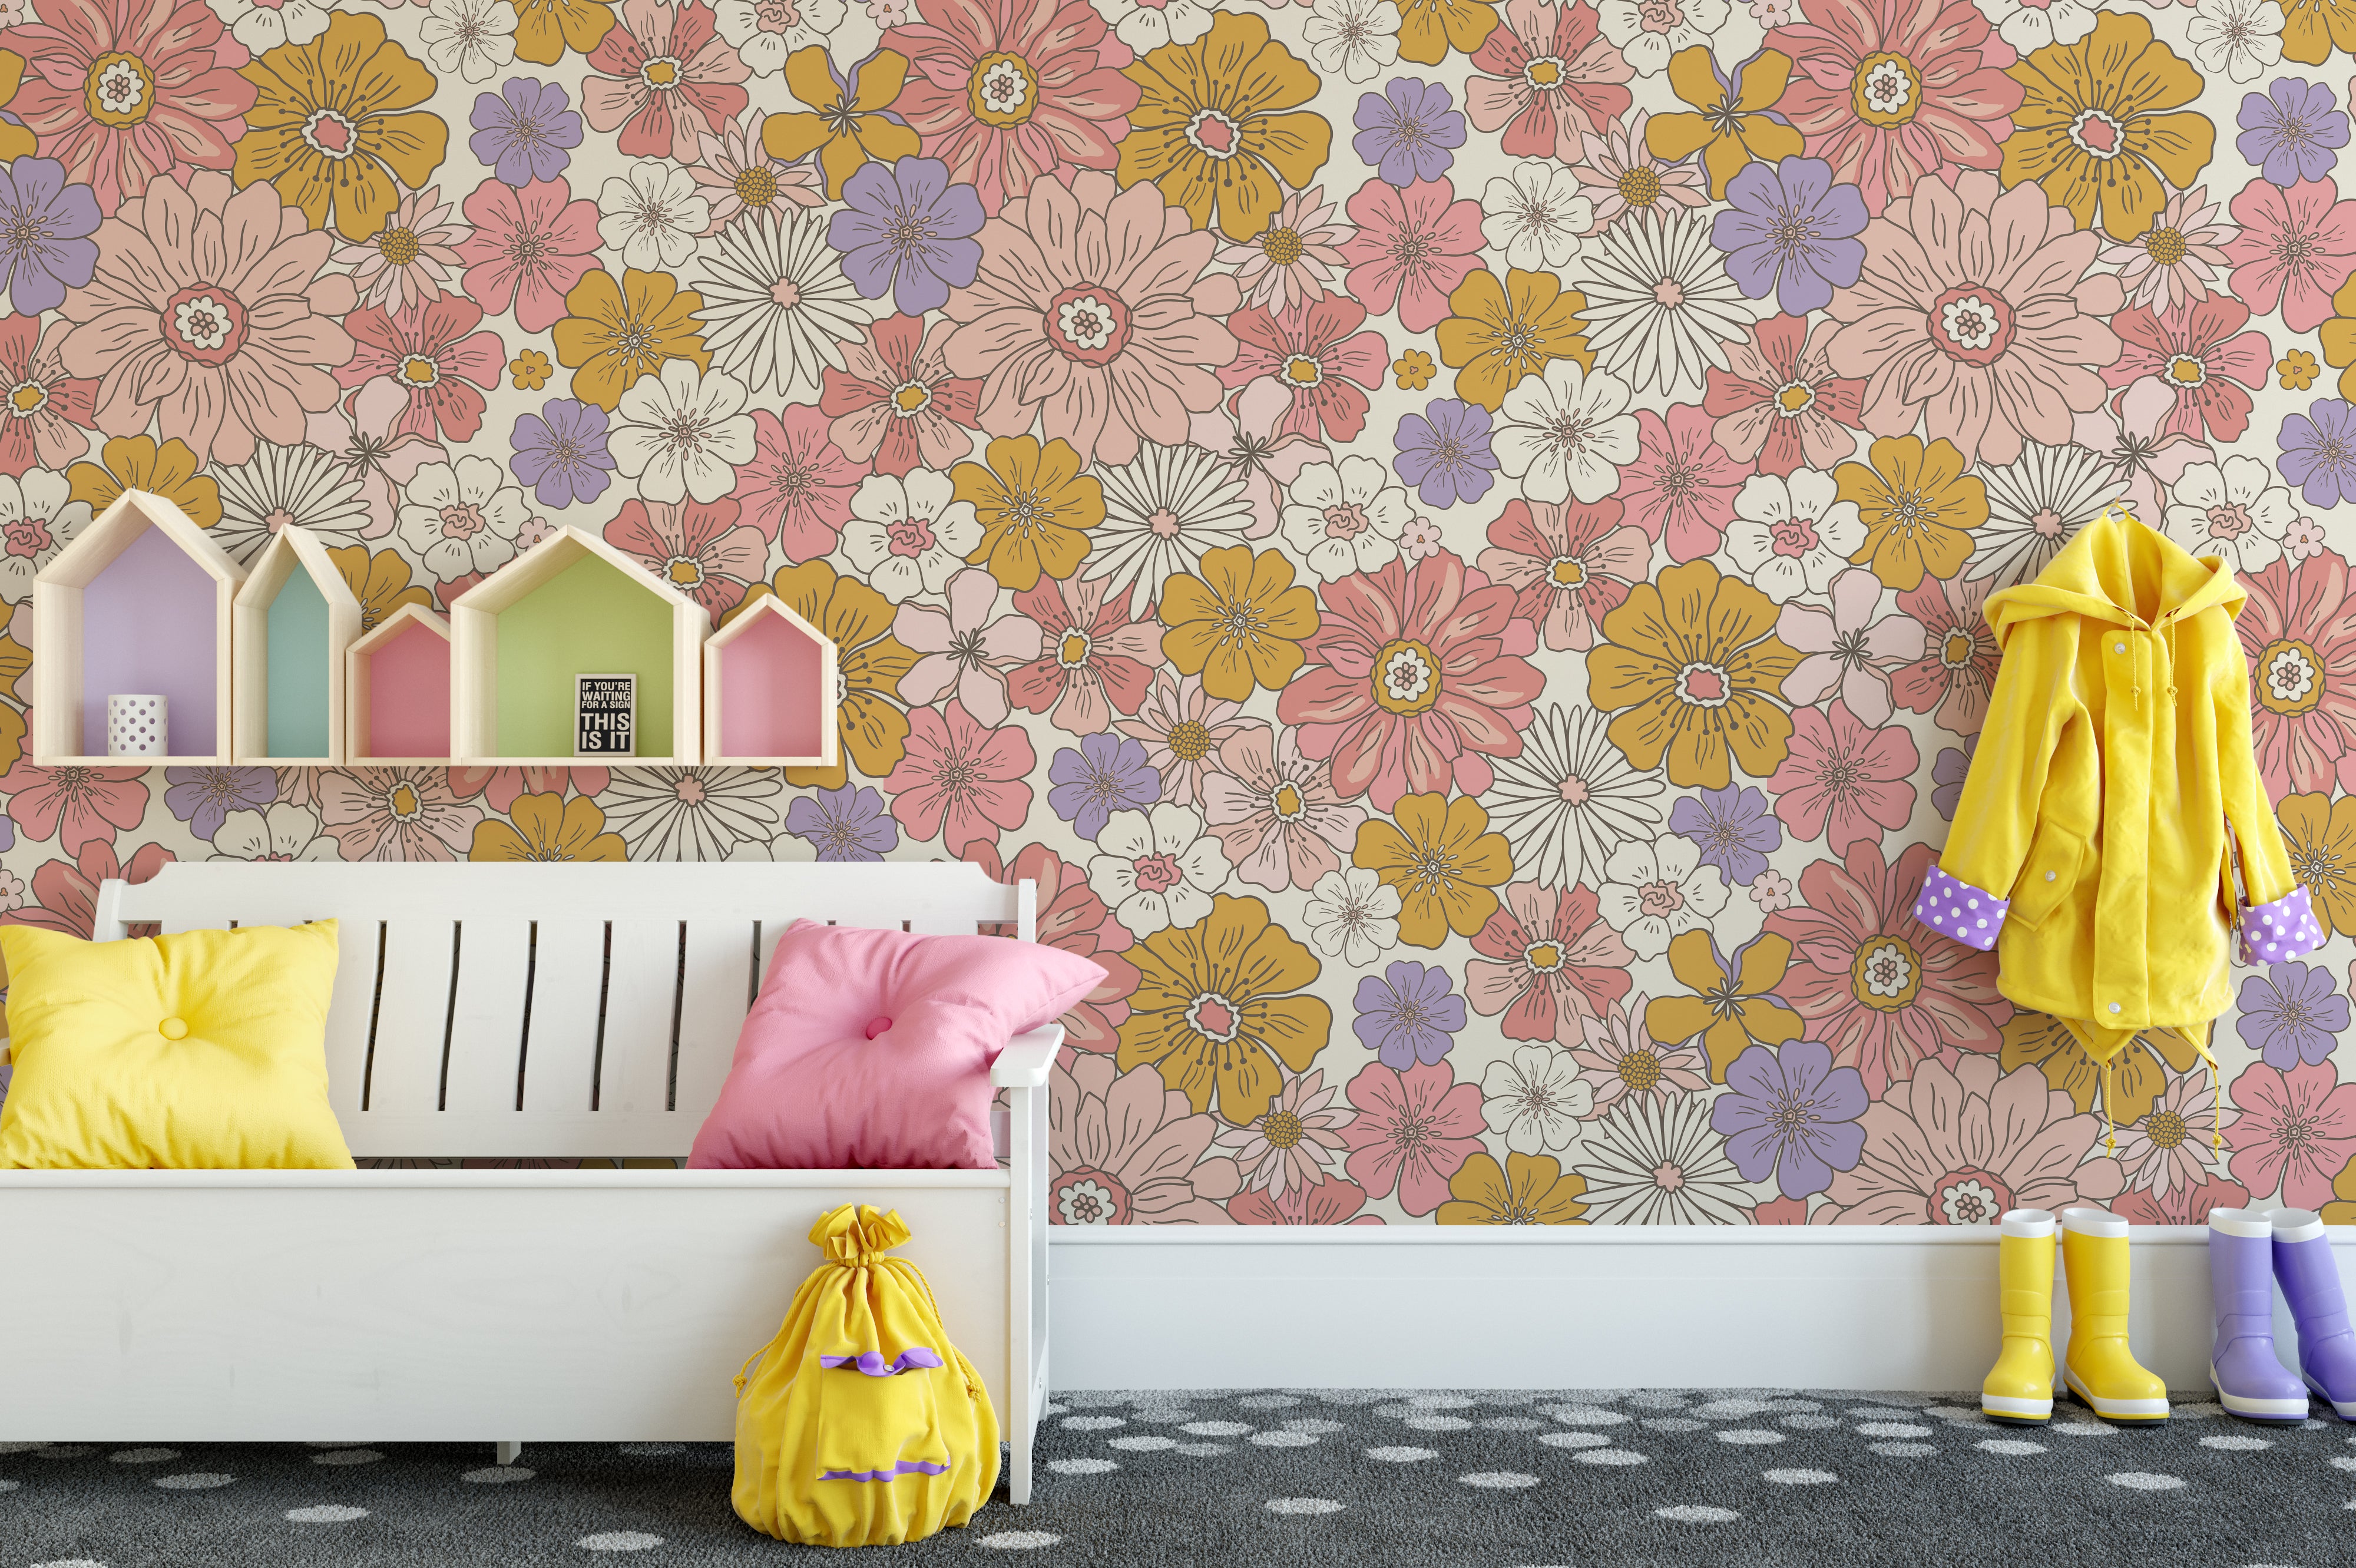 A playful children's room decorated with Retro Groovy Flower Wallpaper, which boasts a colorful floral pattern. The room features a white bed, colorful house-shaped shelves, and a bright interior that complements the lively wallpaper